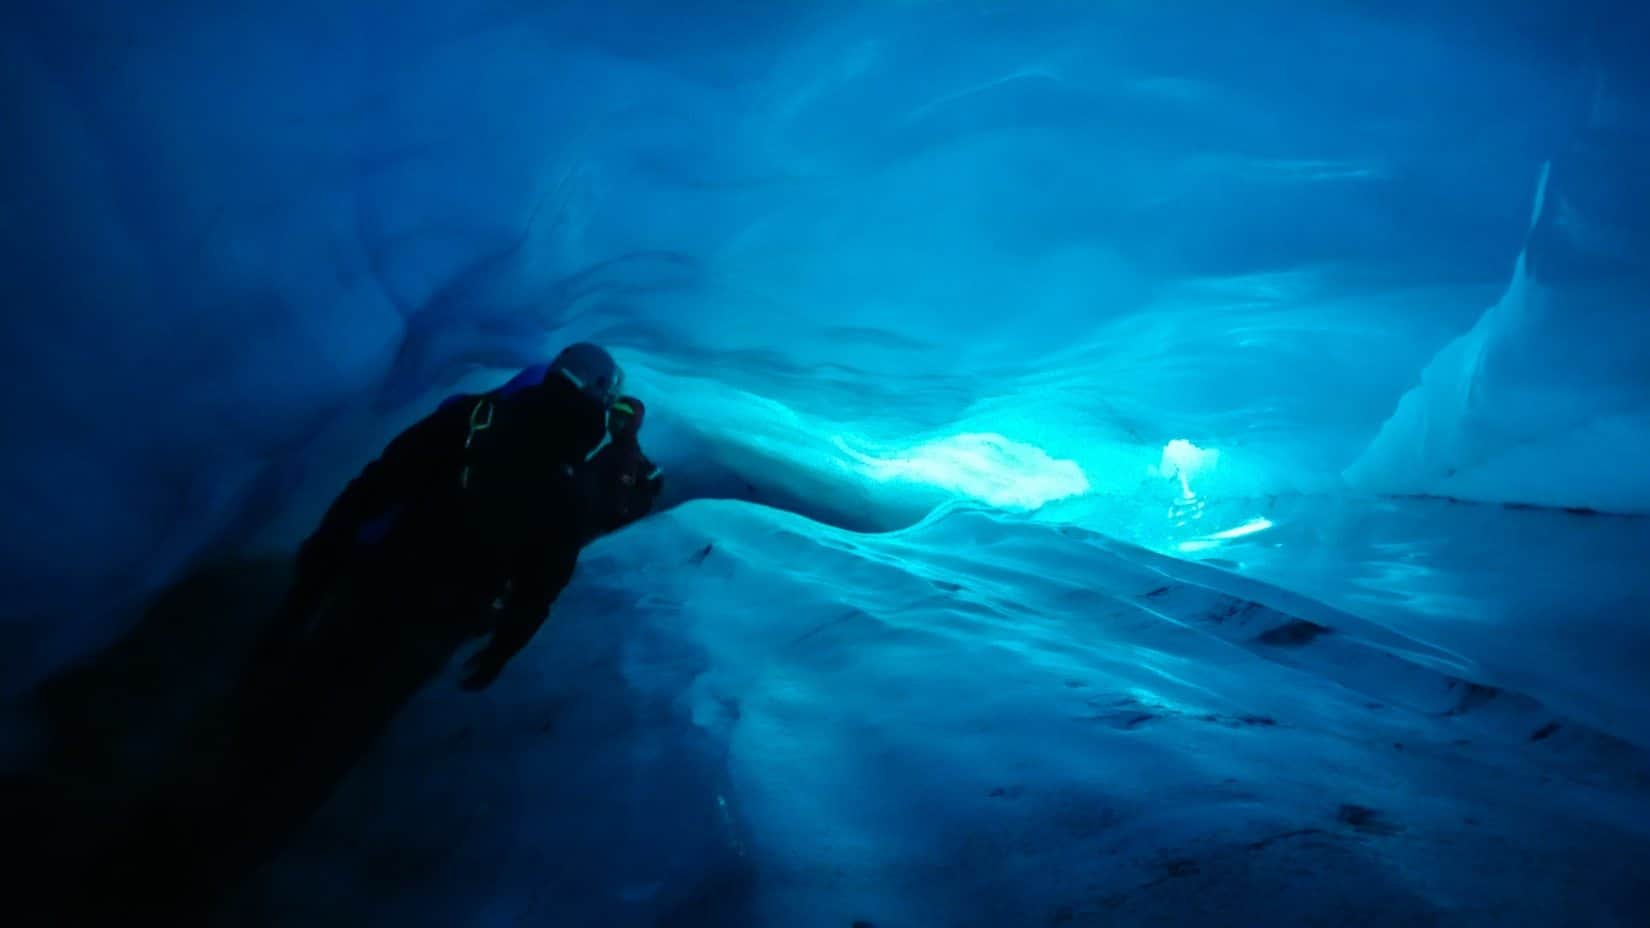 An Ice cave in Iceland